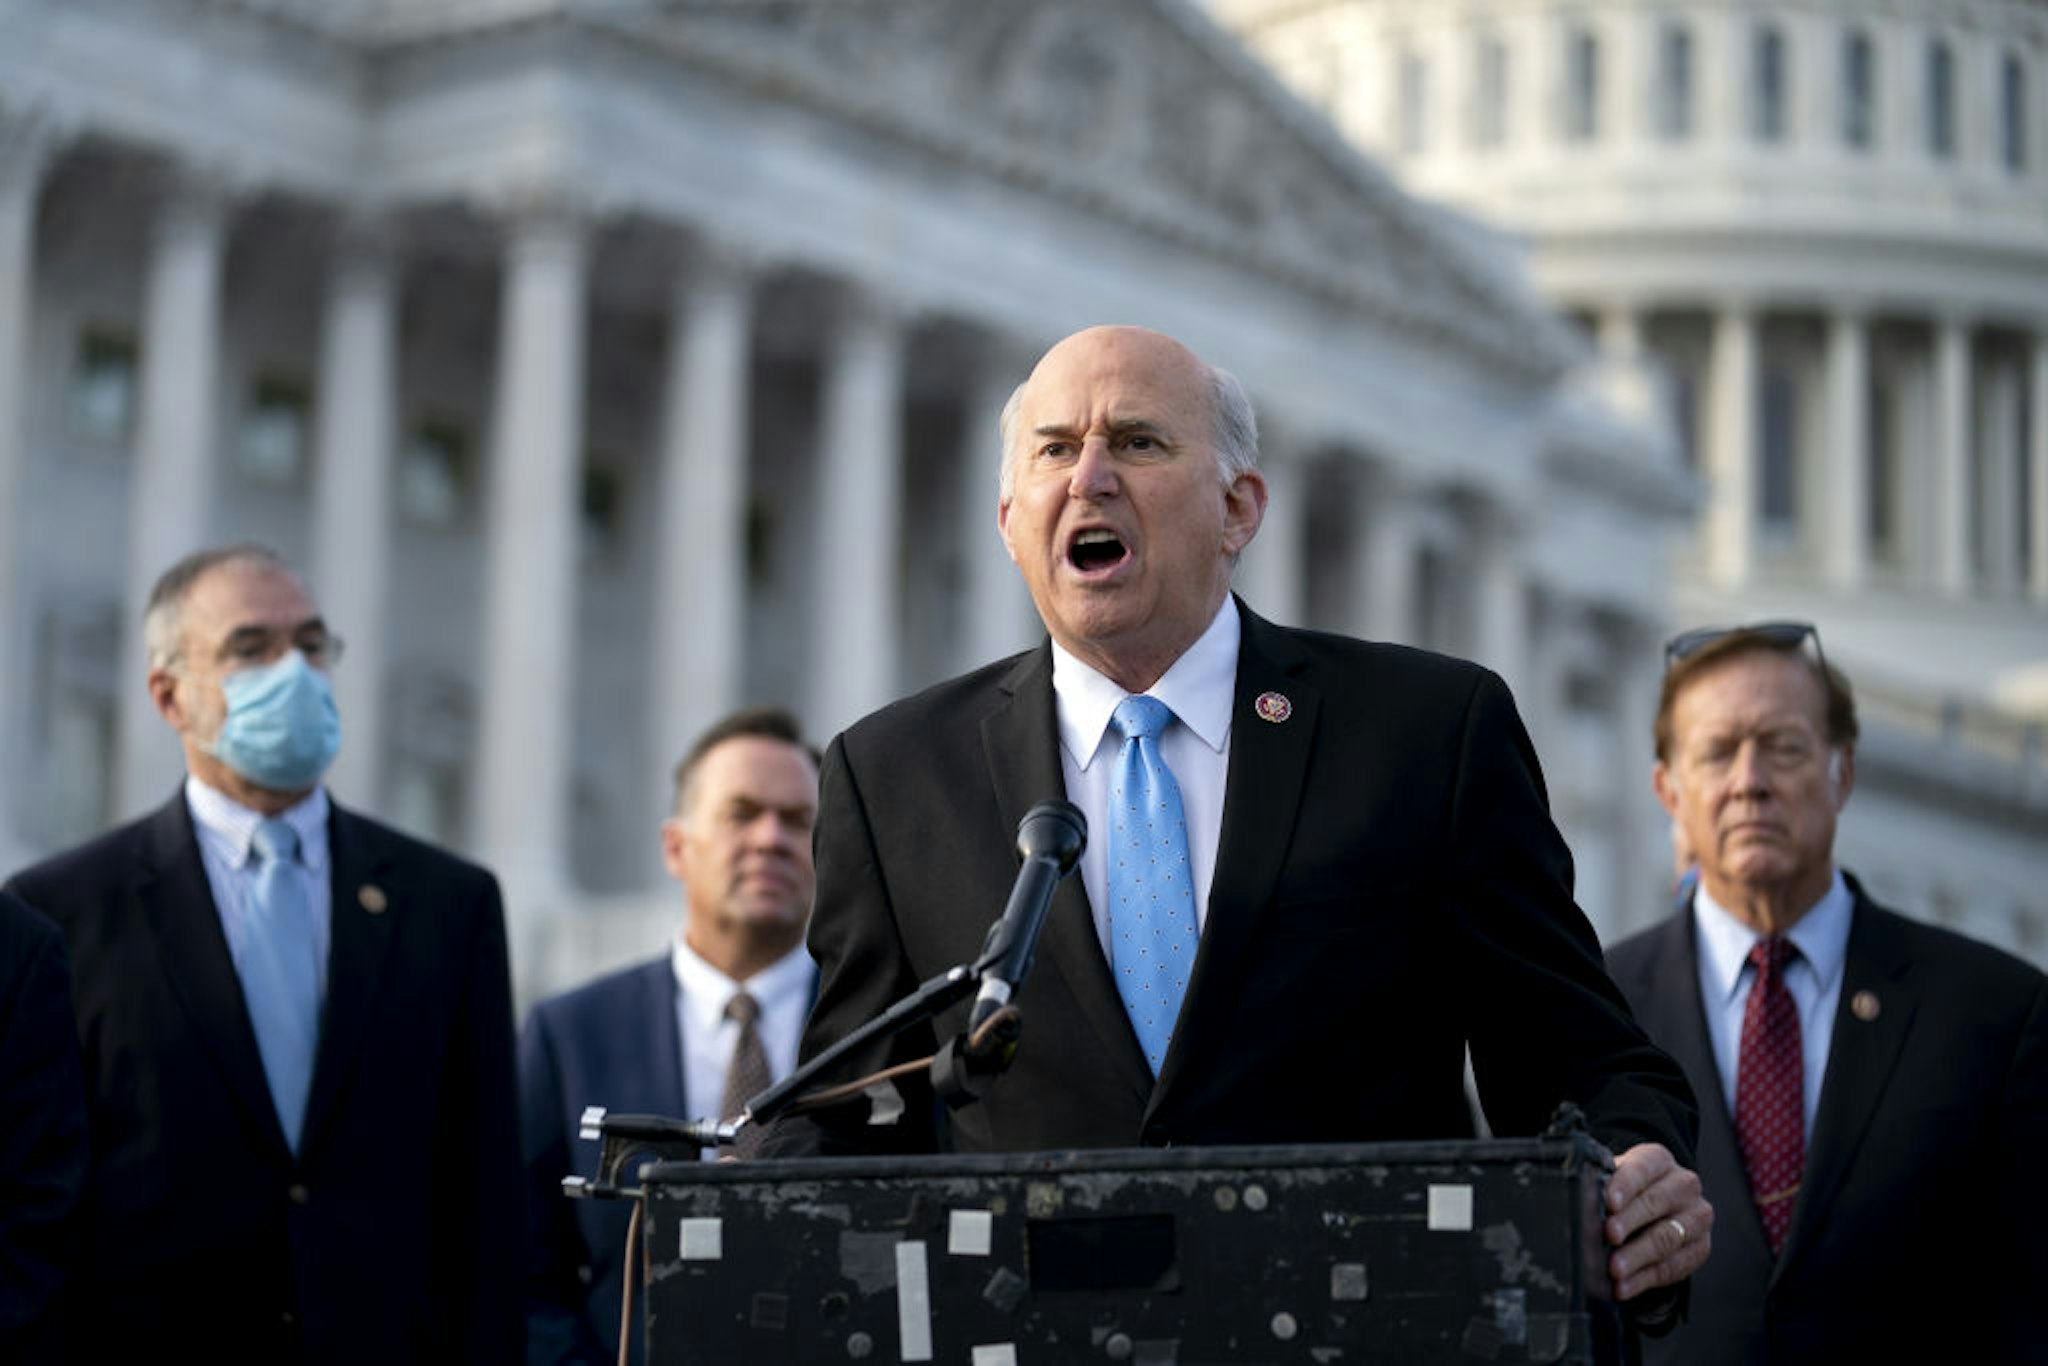 Representative Louie Gohmert, a Republican from Texas, speaks during a news conference with members of the Freedom Caucus outside the U.S. Capitol in Washington, D.C., U.S., on Thursday, Dec. 3, 2020.